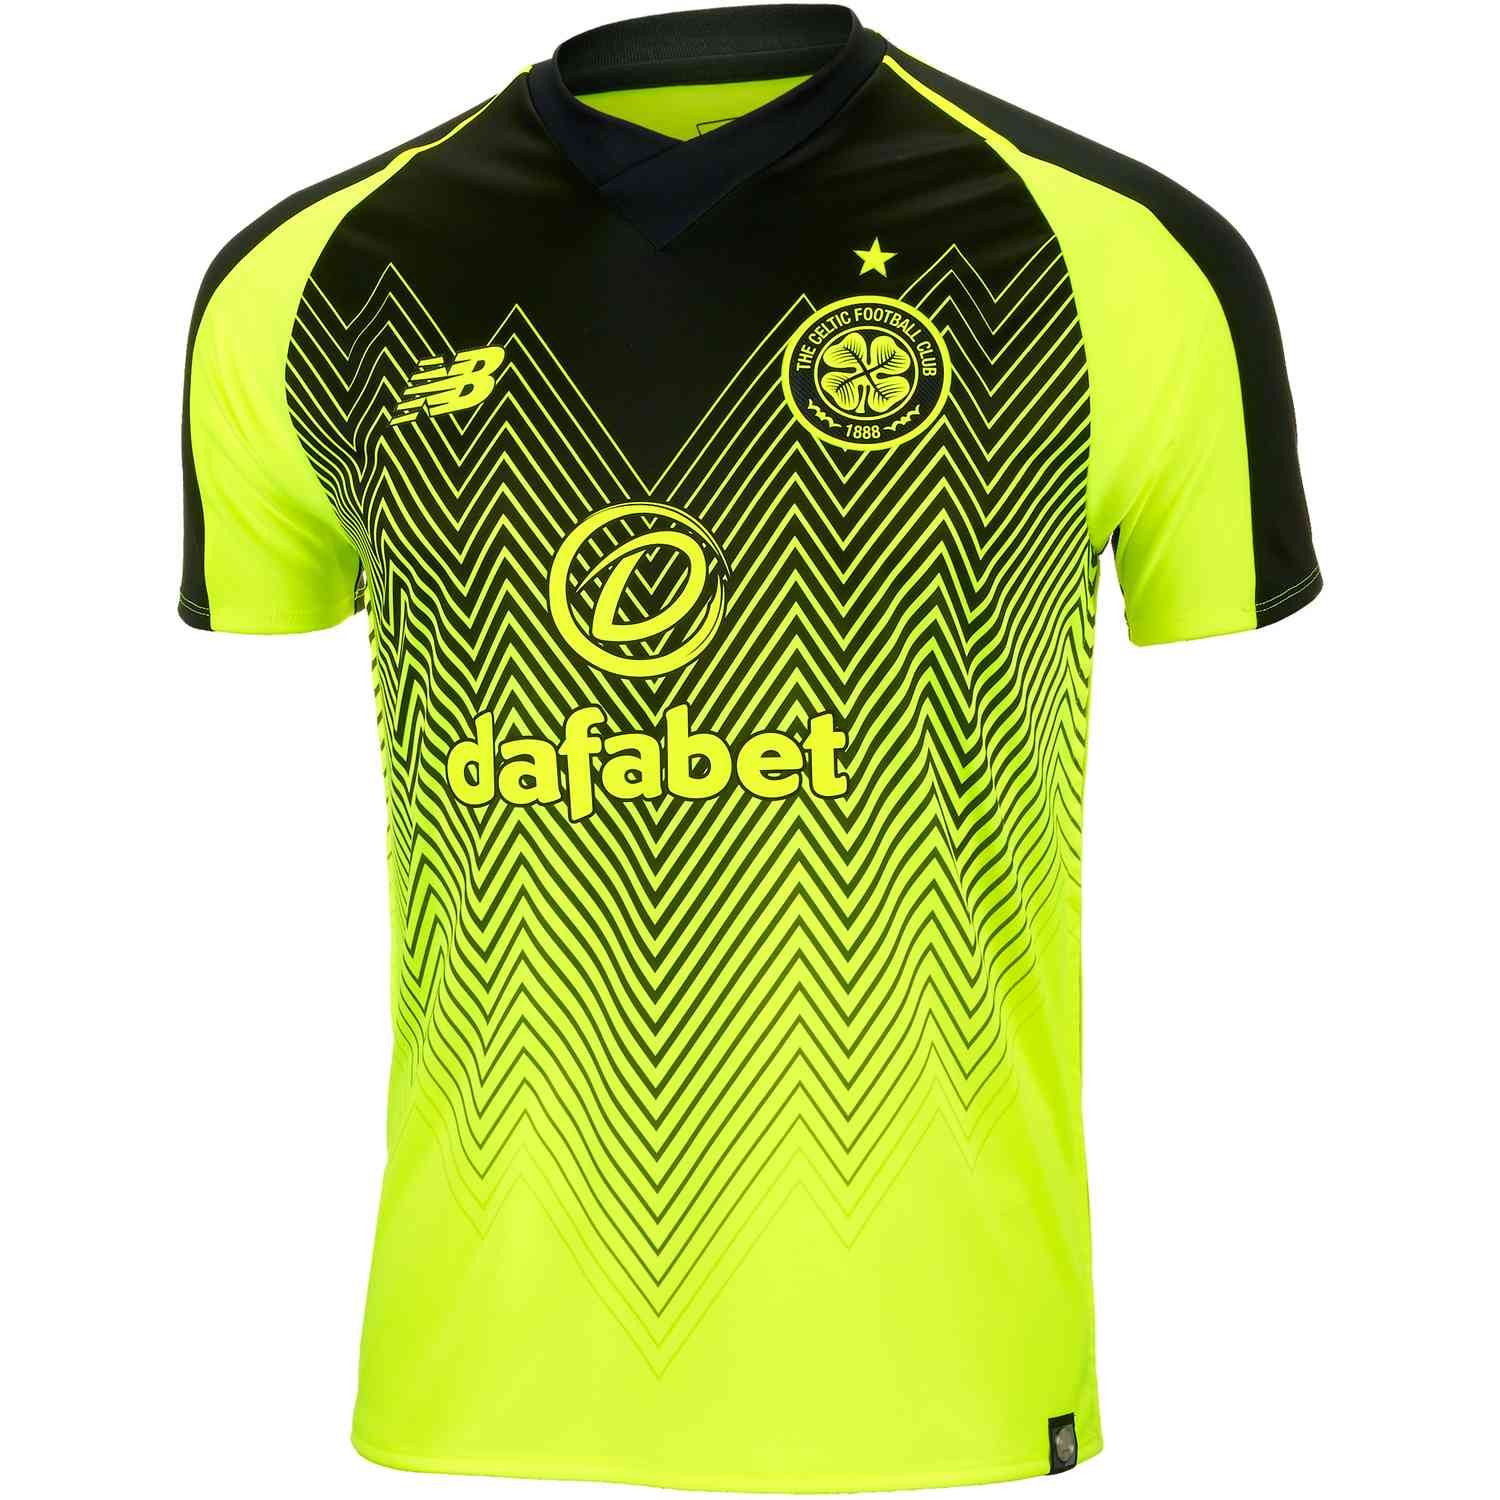 Introducing the new 2017/18 Celtic Third Kit by New Balance